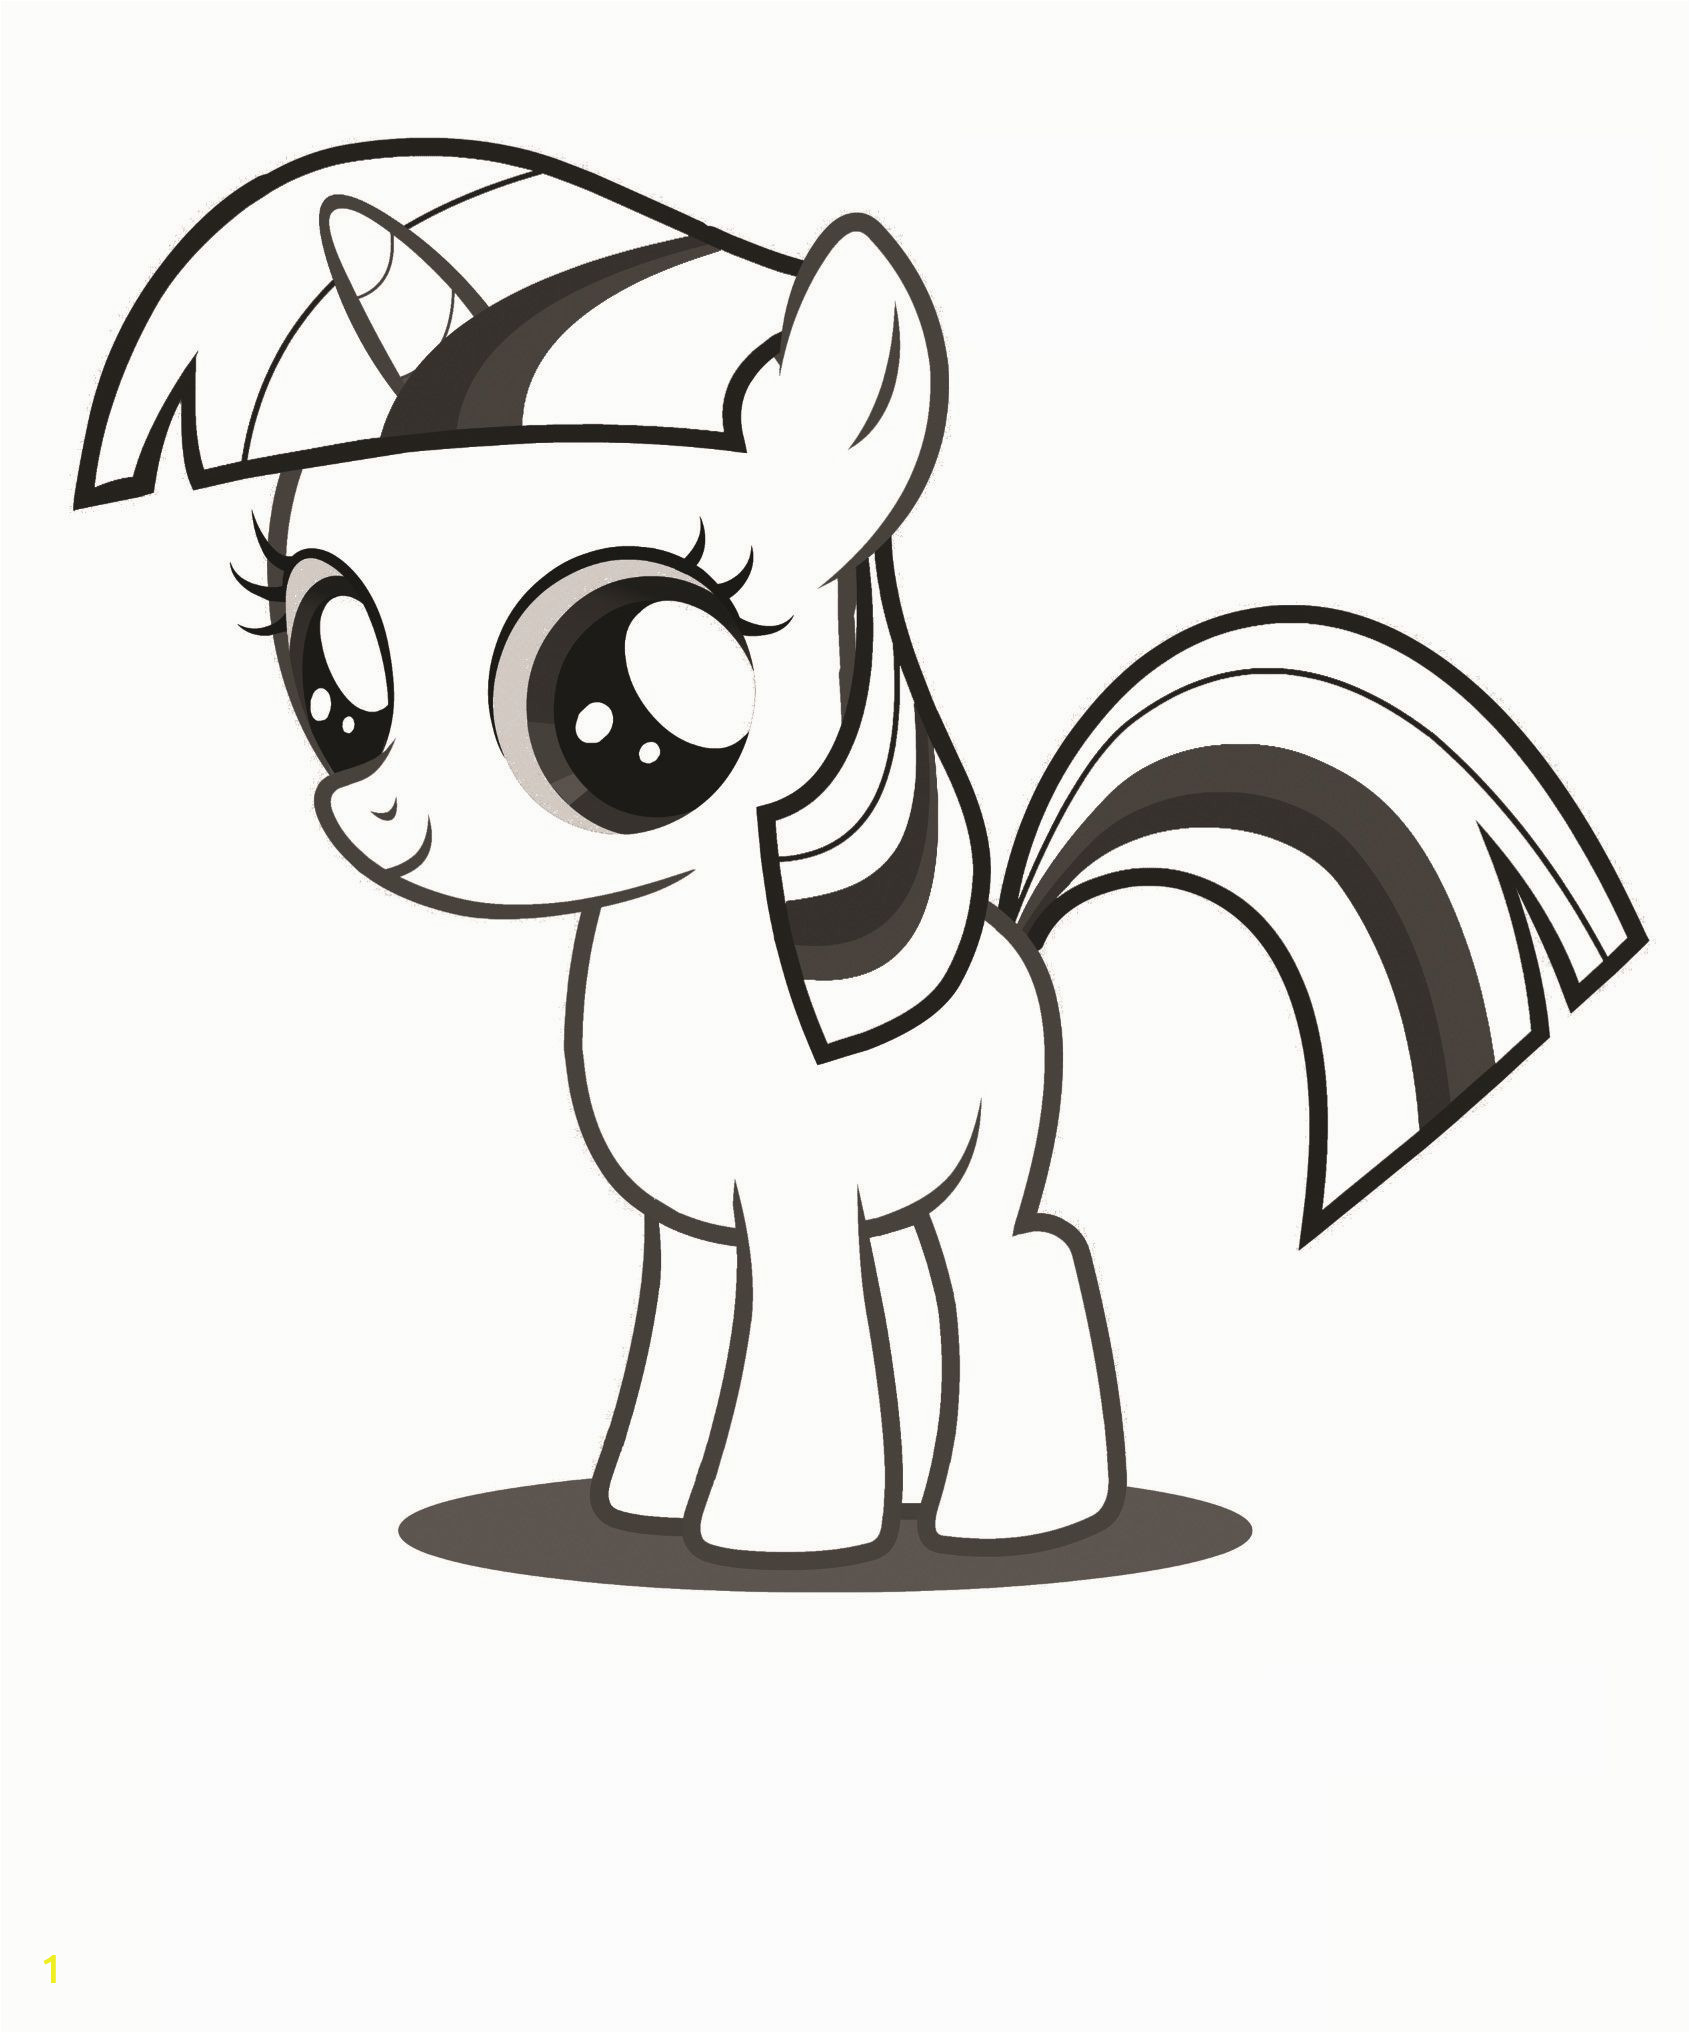 Free My Little Pony Coloring Pages My Little Pony Boy Coloring Pages Coloring Home